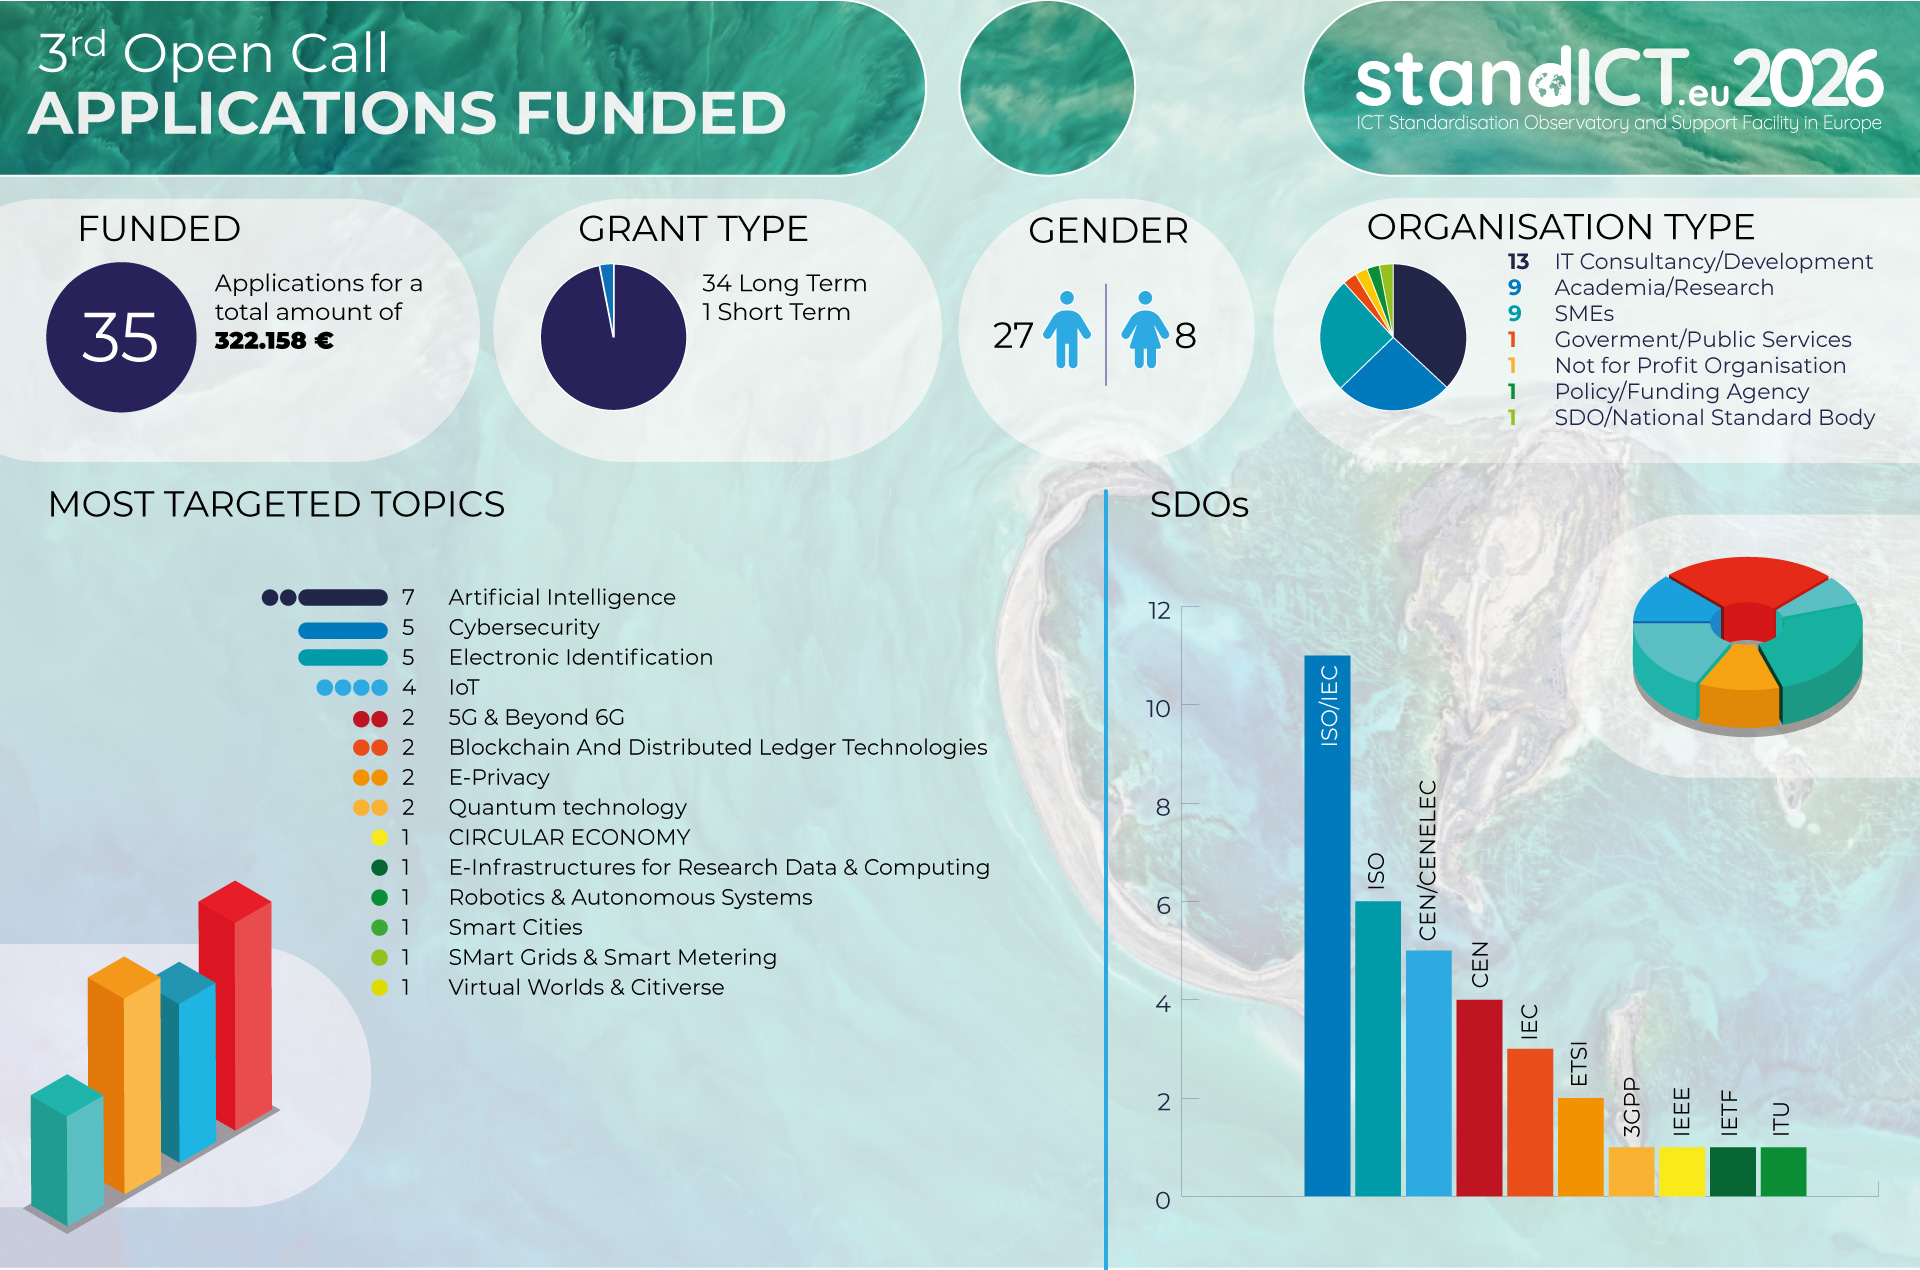 Statistics_Funded_OpenCall_3_2026